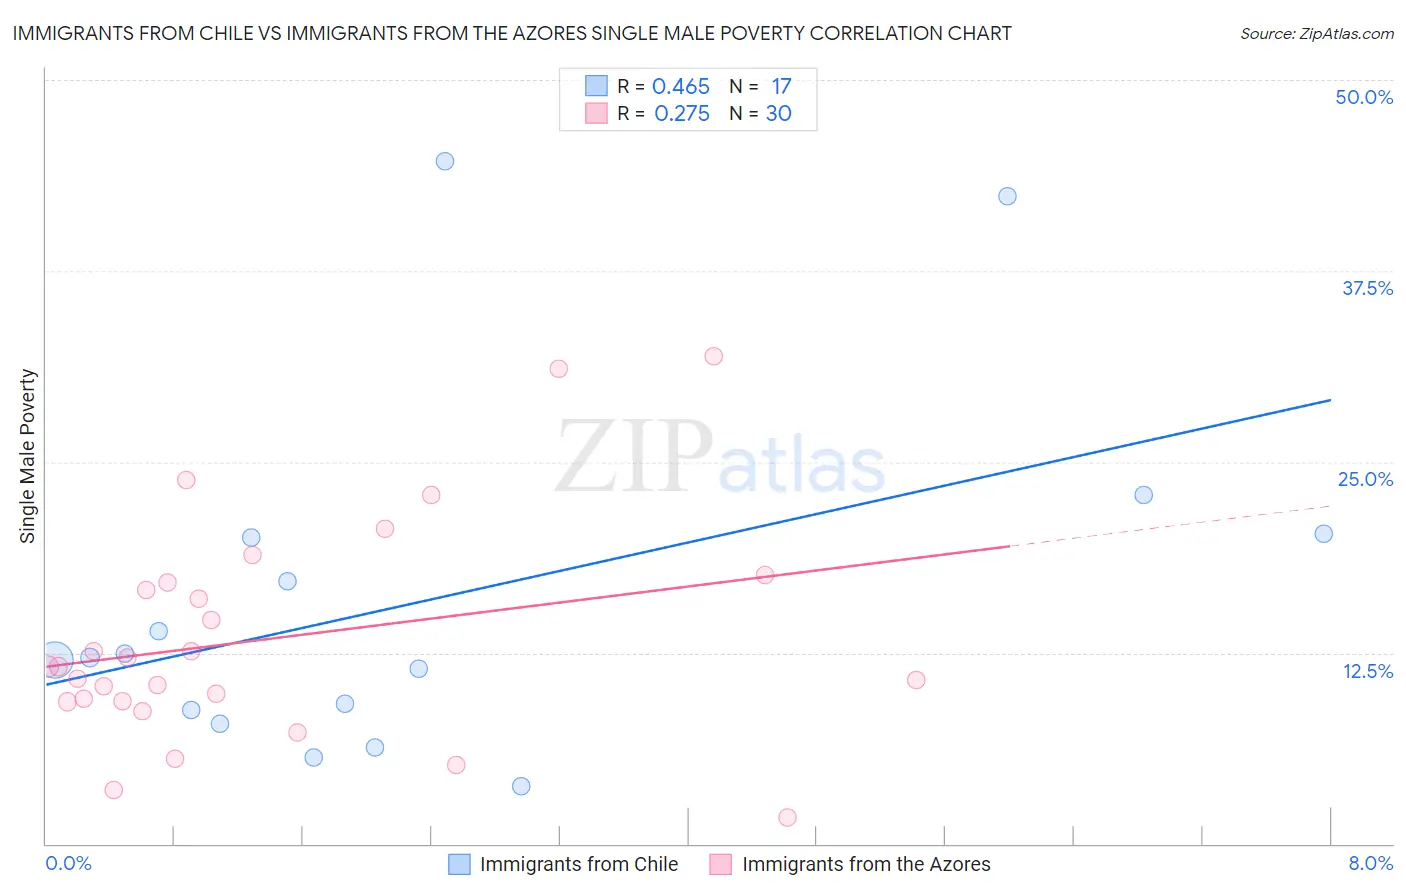 Immigrants from Chile vs Immigrants from the Azores Single Male Poverty